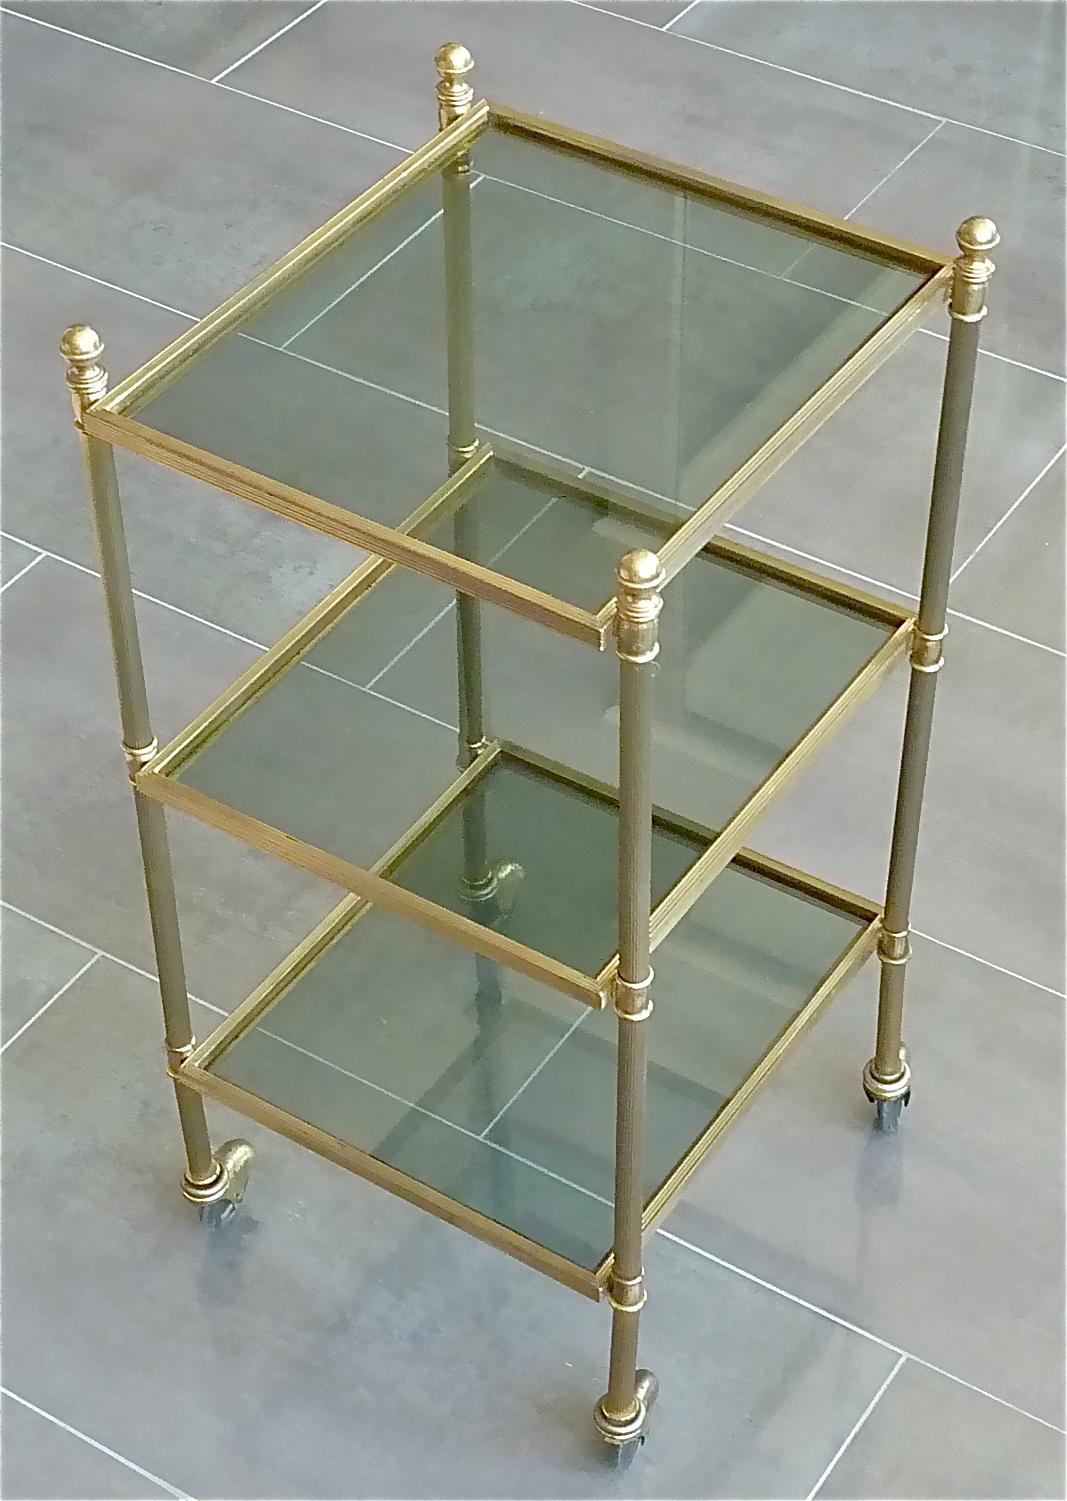 Amazing 3-tiers vintage bar cart, drinks serving trolley or side table on four wheels made by Maison Jansen Paris, France circa 1950. It is made of patinated brass with clear slightly grey to green tinted glass. The small beautiful and useful table